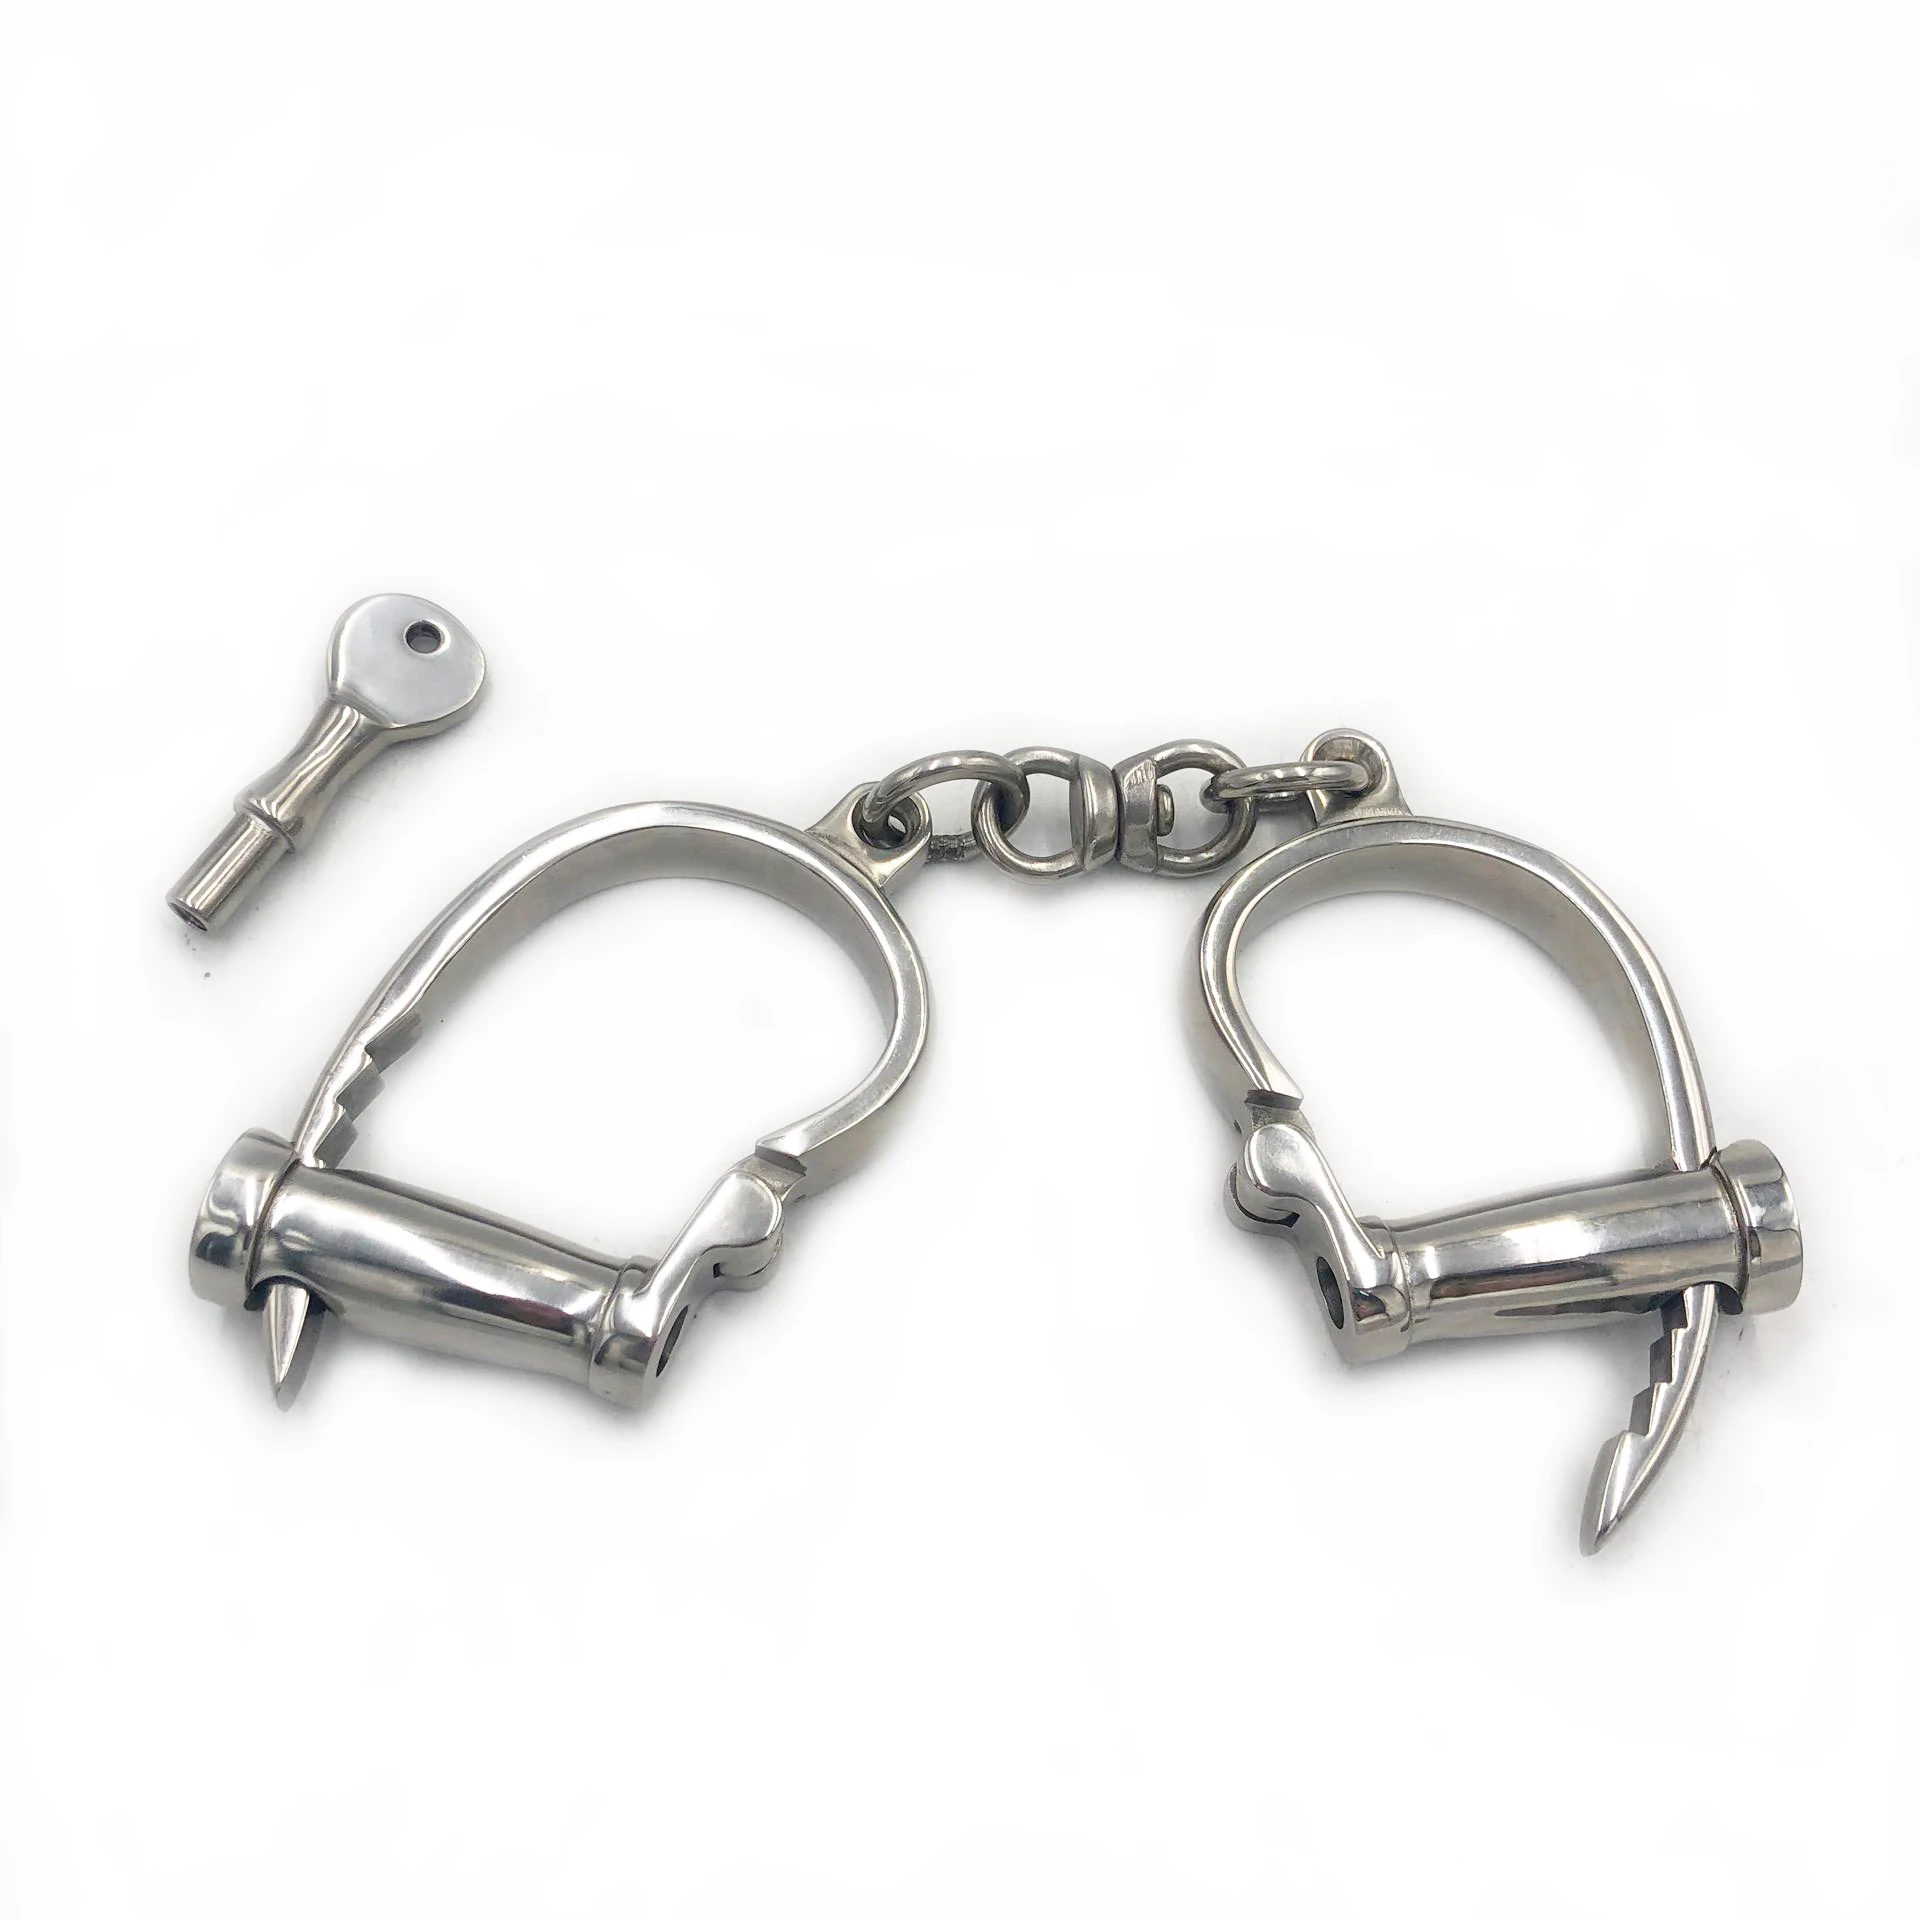 

Black emperor SM toys， new stainless steel unisex horseshoe handcuffs adult fun couple supplies exquisite alternative